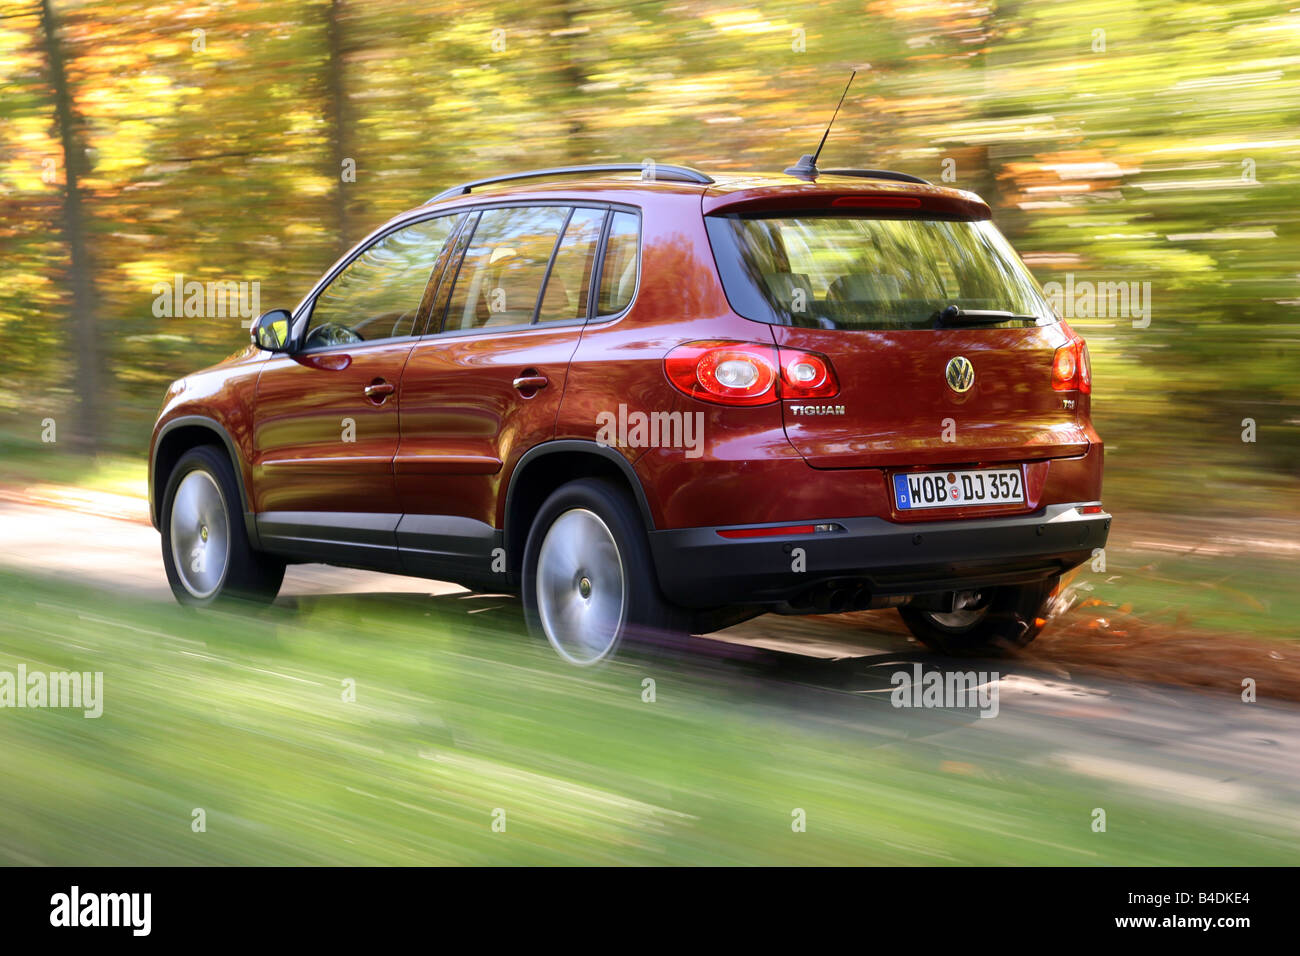 VW Volkswagen Tiguan 1.4 TSI Track & Field, model year 2007-, red, driving, diagonal from the back, rear view, country road Stock Photo